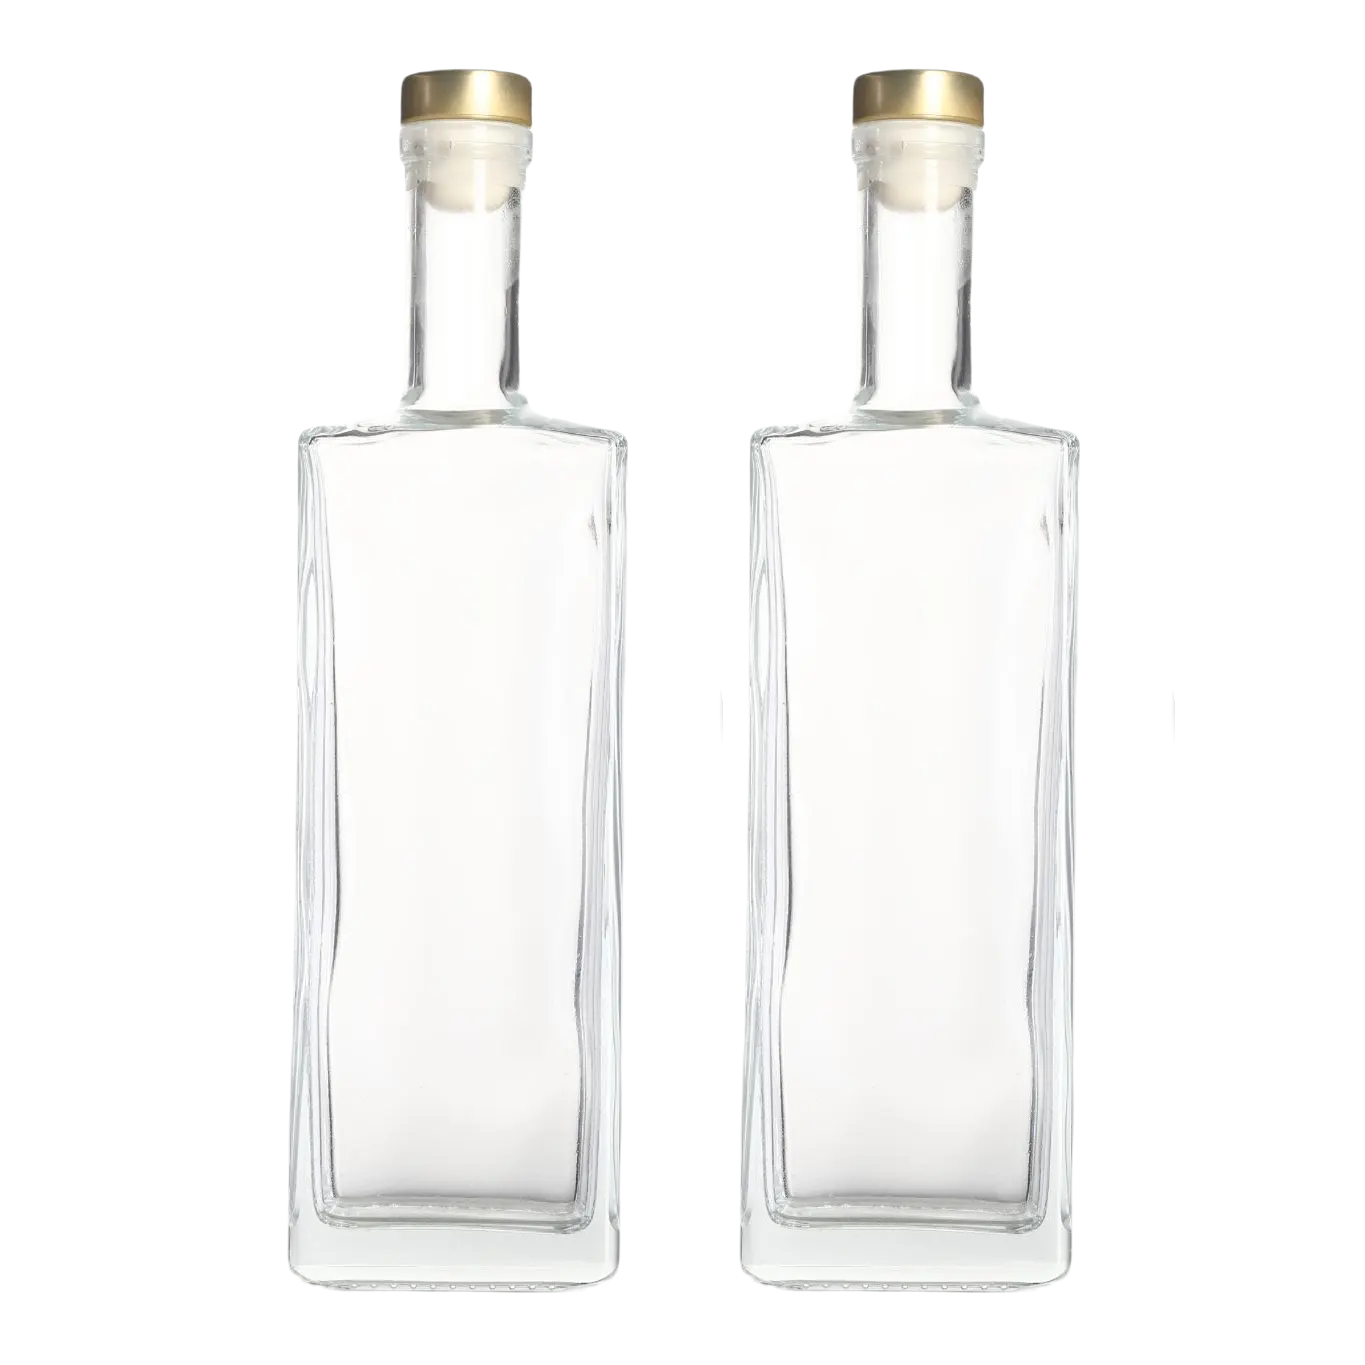 Weekly Deals 750ml Super High Flint Square Glass Bottles for Gin Tanqueray 750 ml Liquor Bottle Shrink Caps with Cork